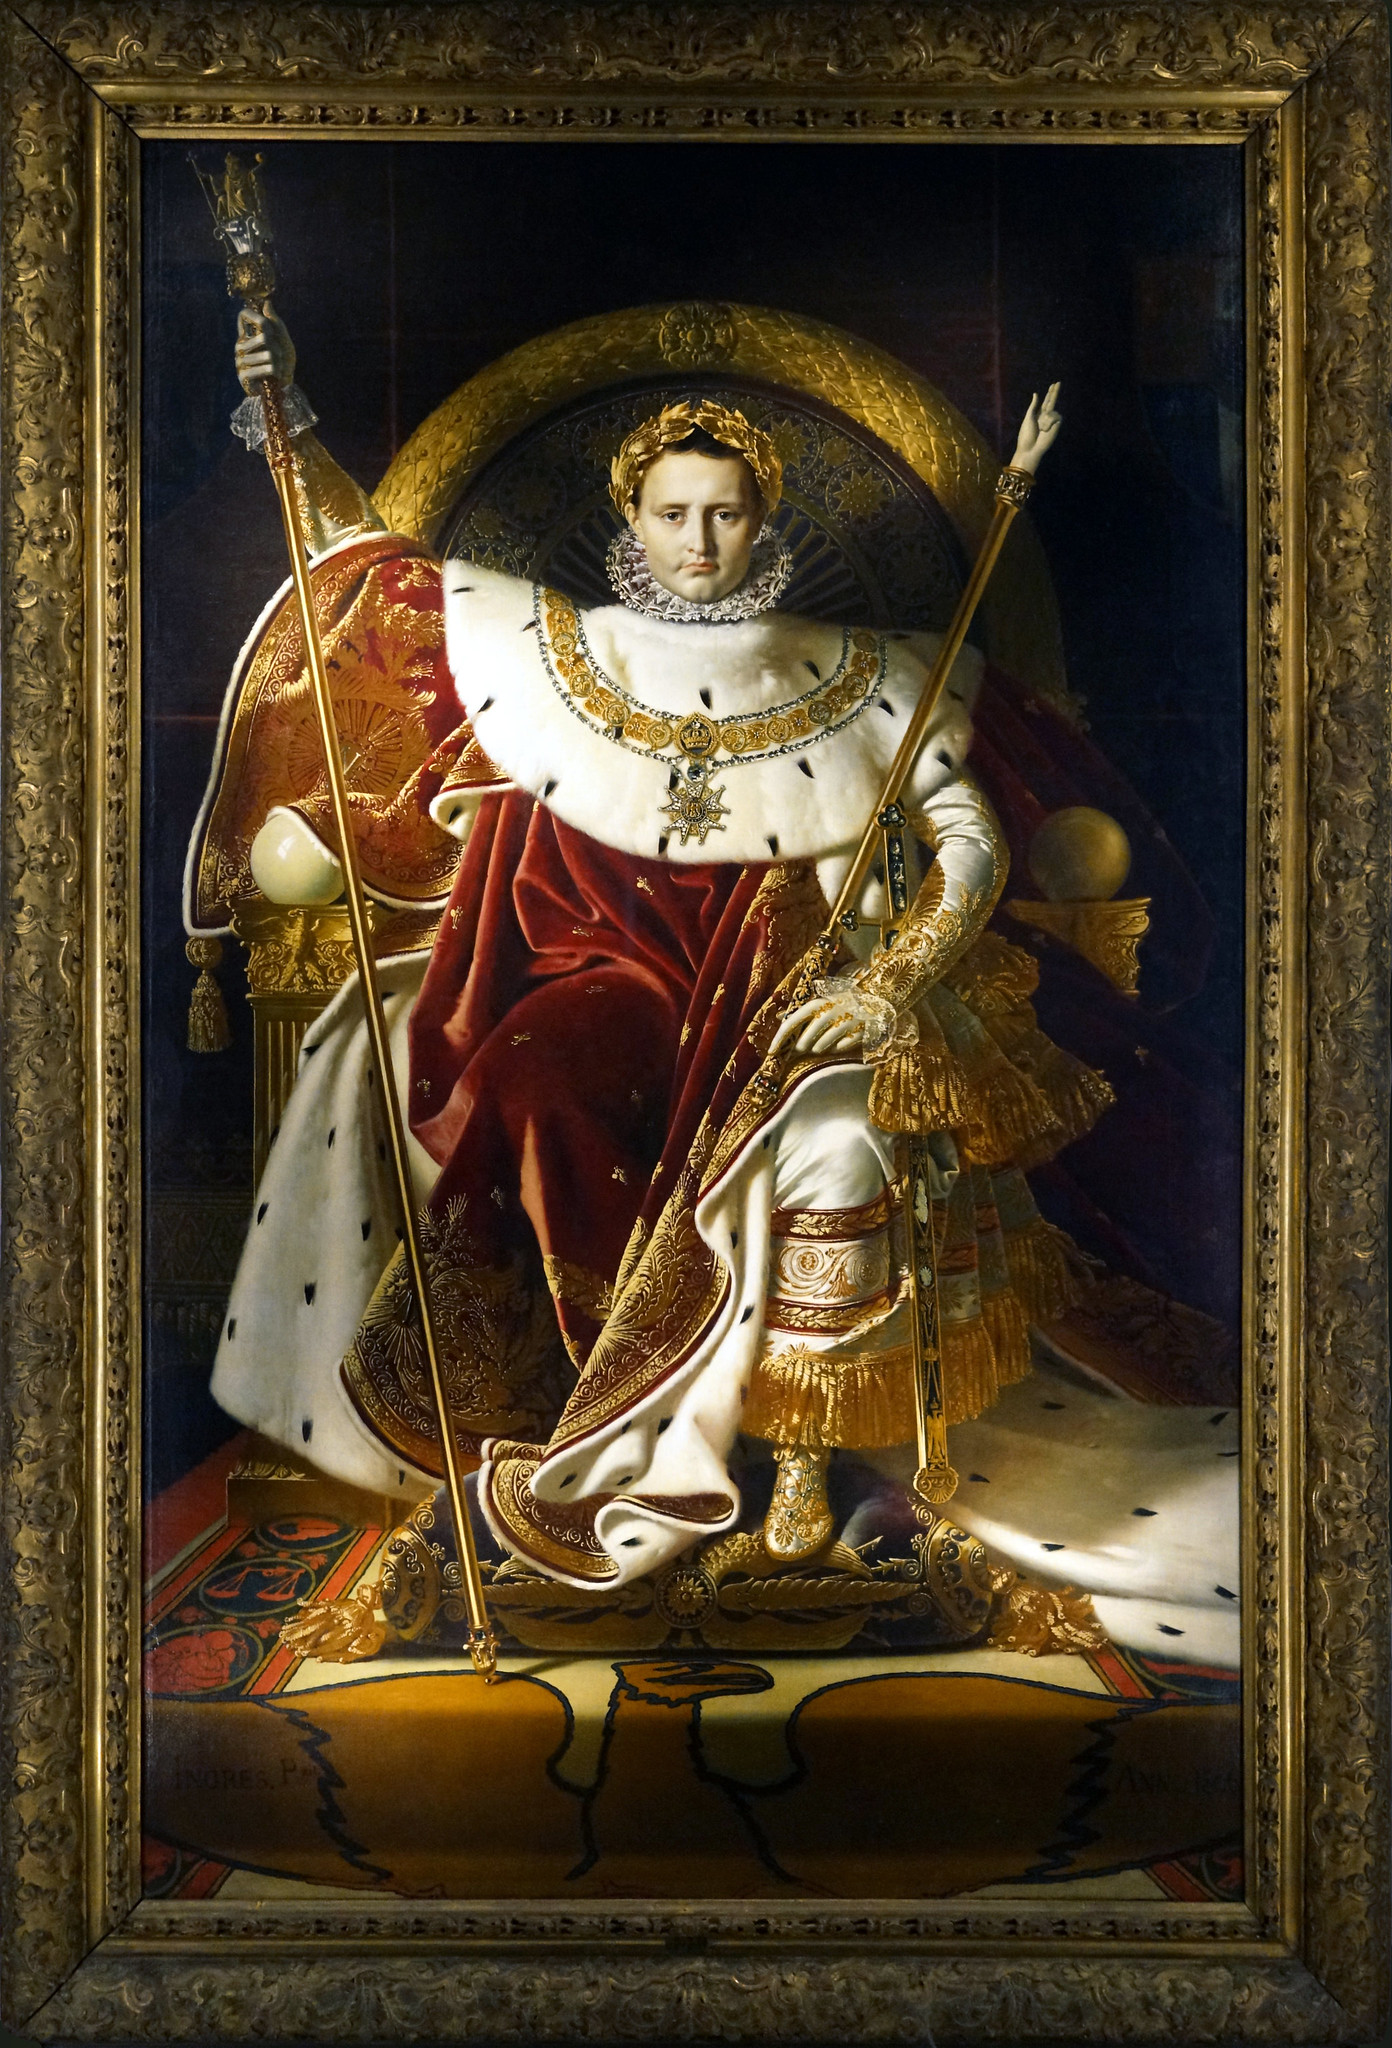 » JeanAugusteDominique Ingres, Napoleon on His Imperial Throne